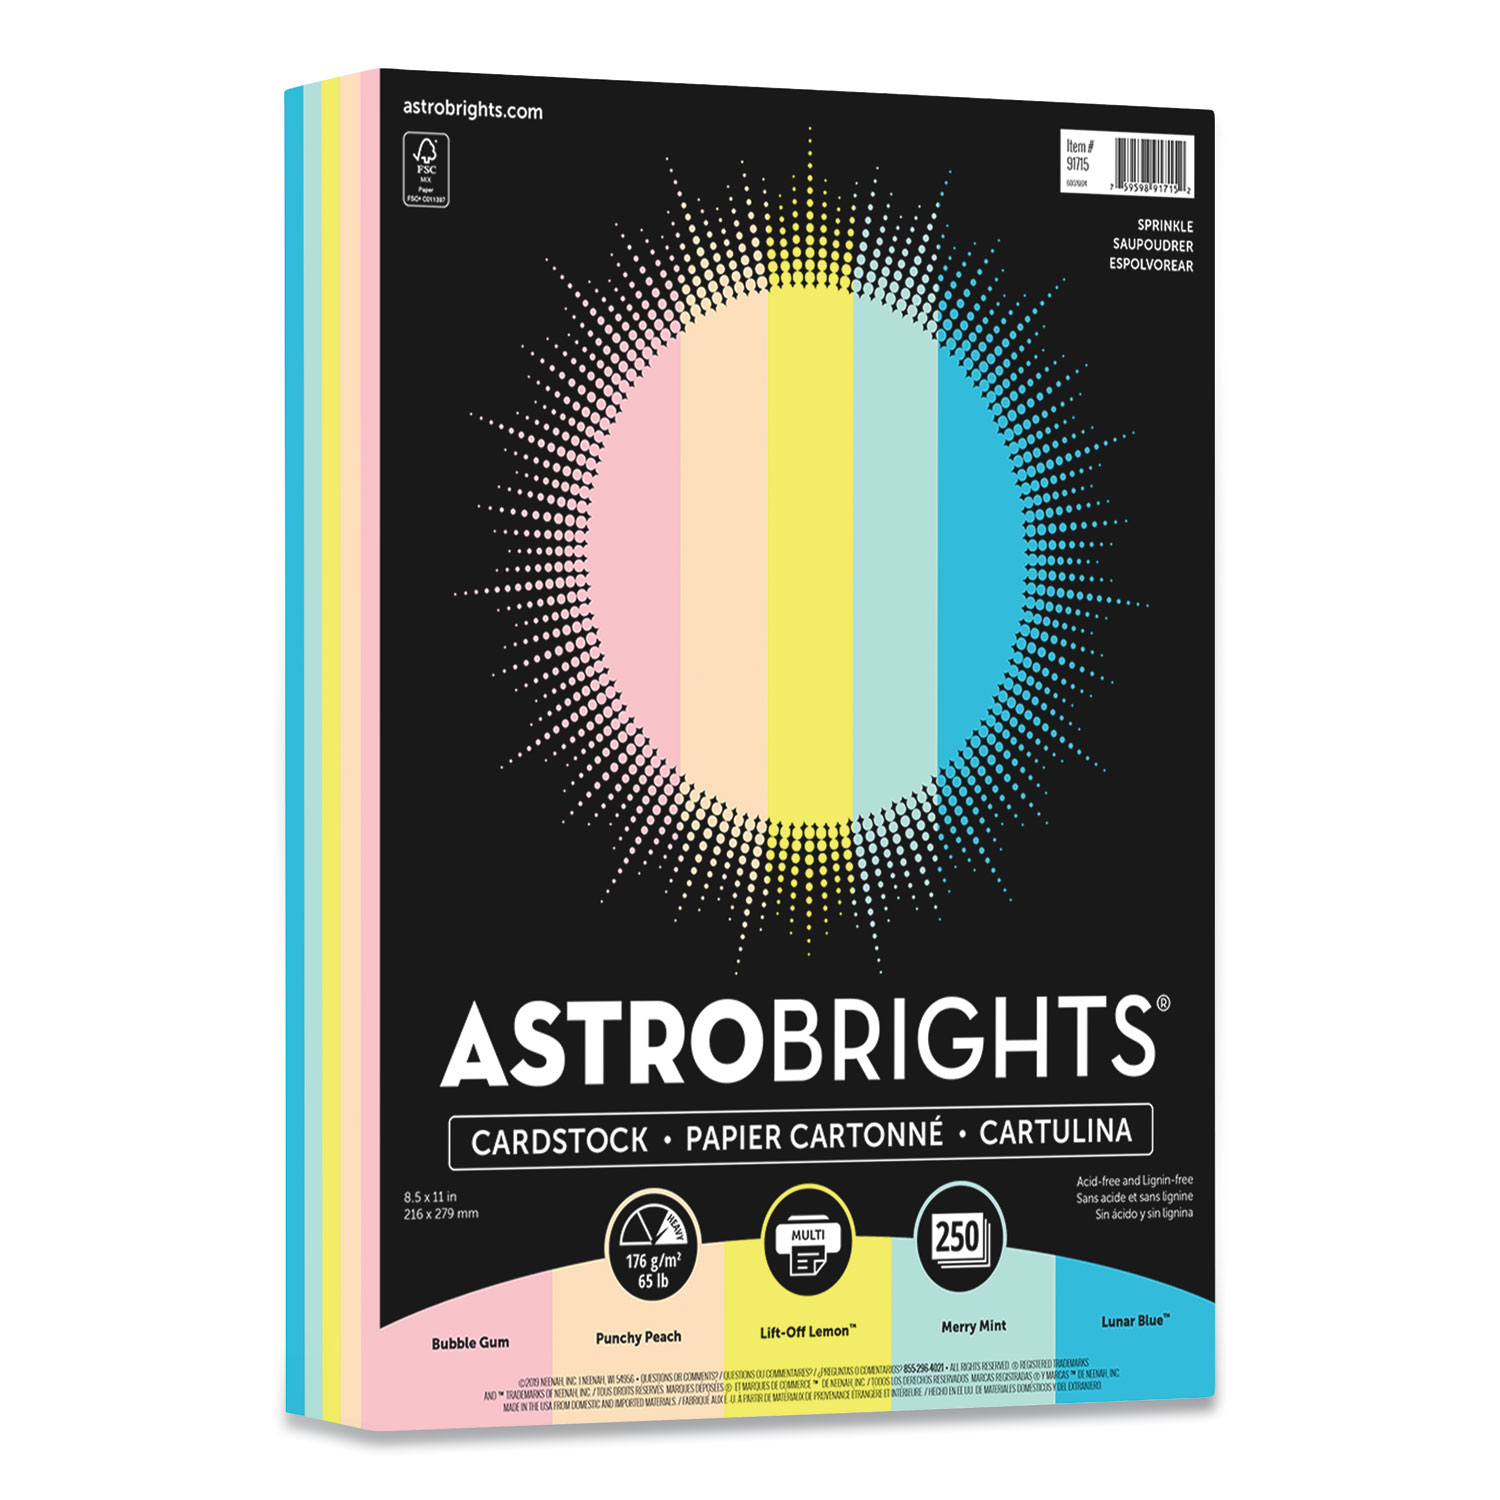  Astrobrights 91715 Color Cardstock, 65 lb, 8.5 x 11, Assorted Colors, 250/Pack (WAU91715) 